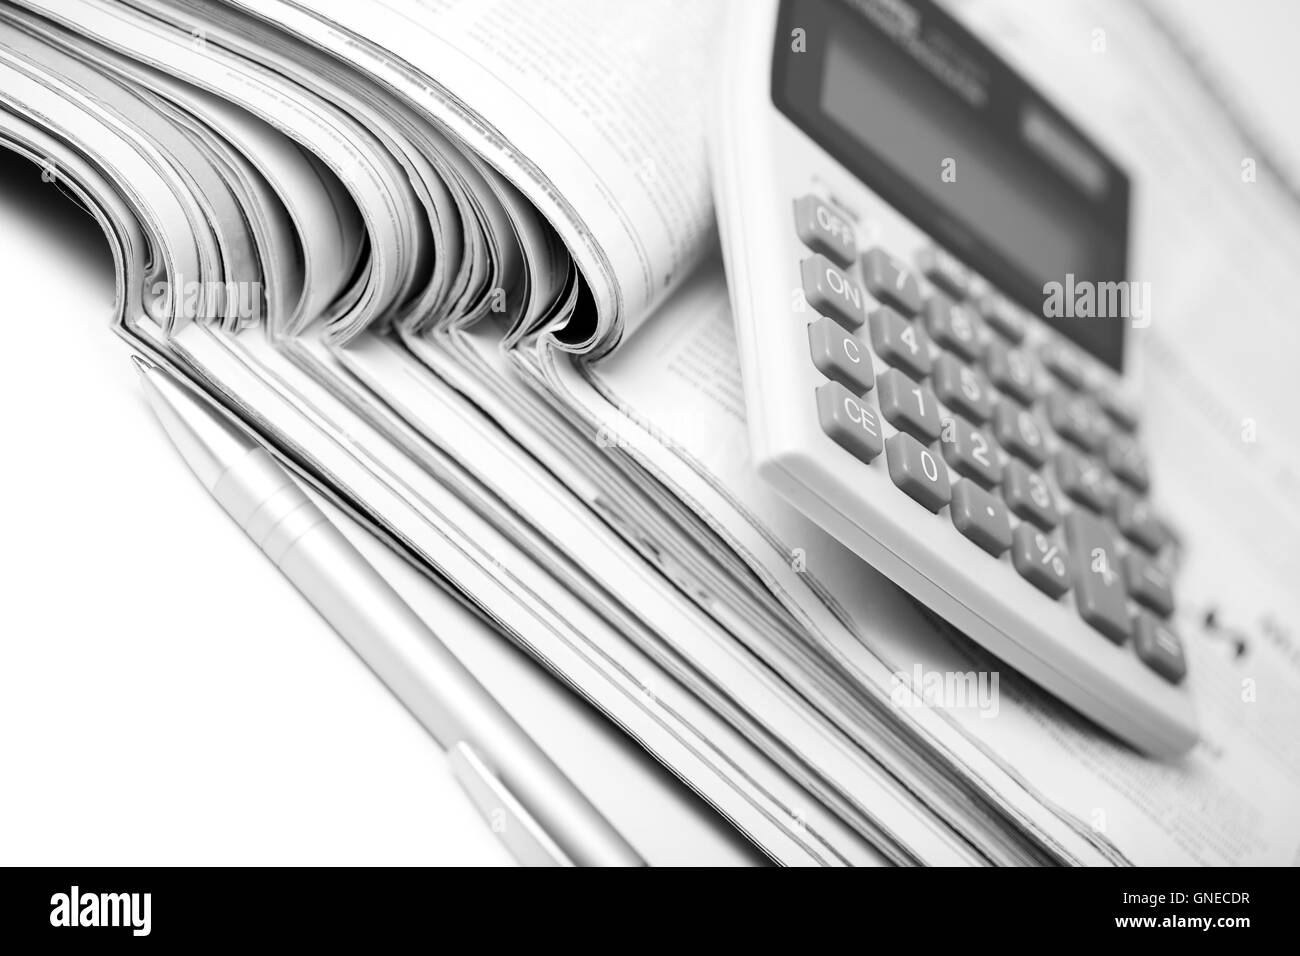 newspapers, pen and calculator. business background Stock Photo